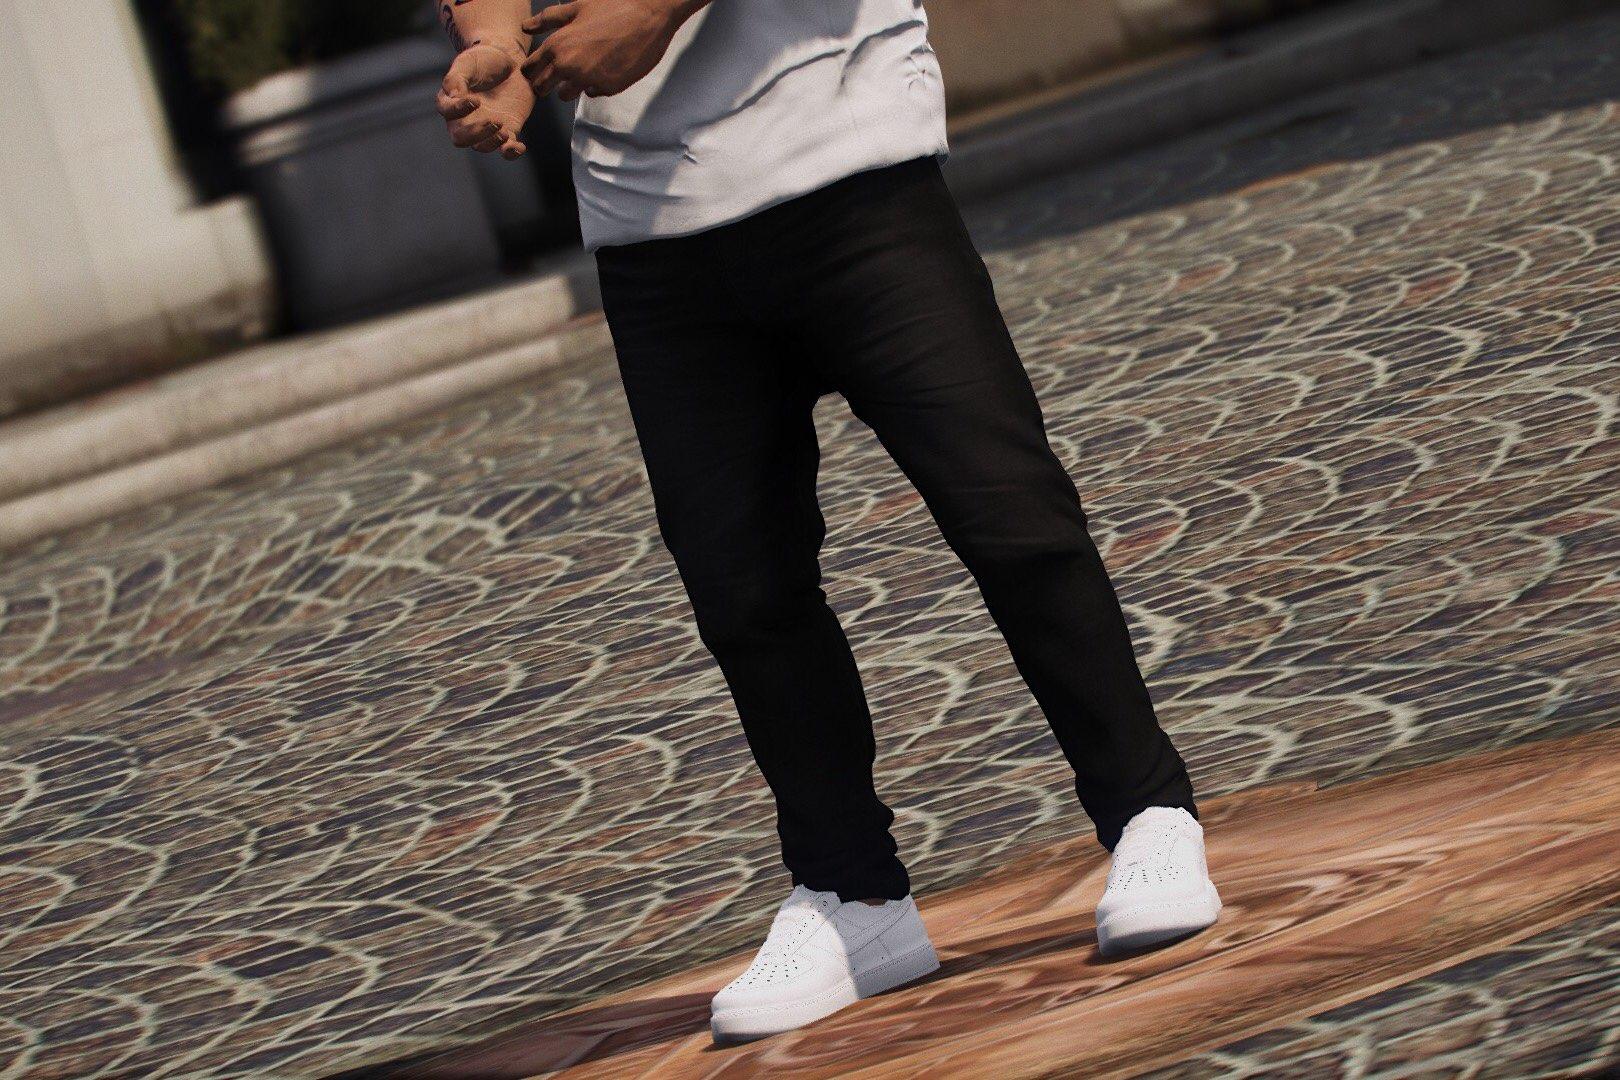 Fivemsp Slightly Sagged Jeans For Mp Male Gta5 | Images and Photos finder